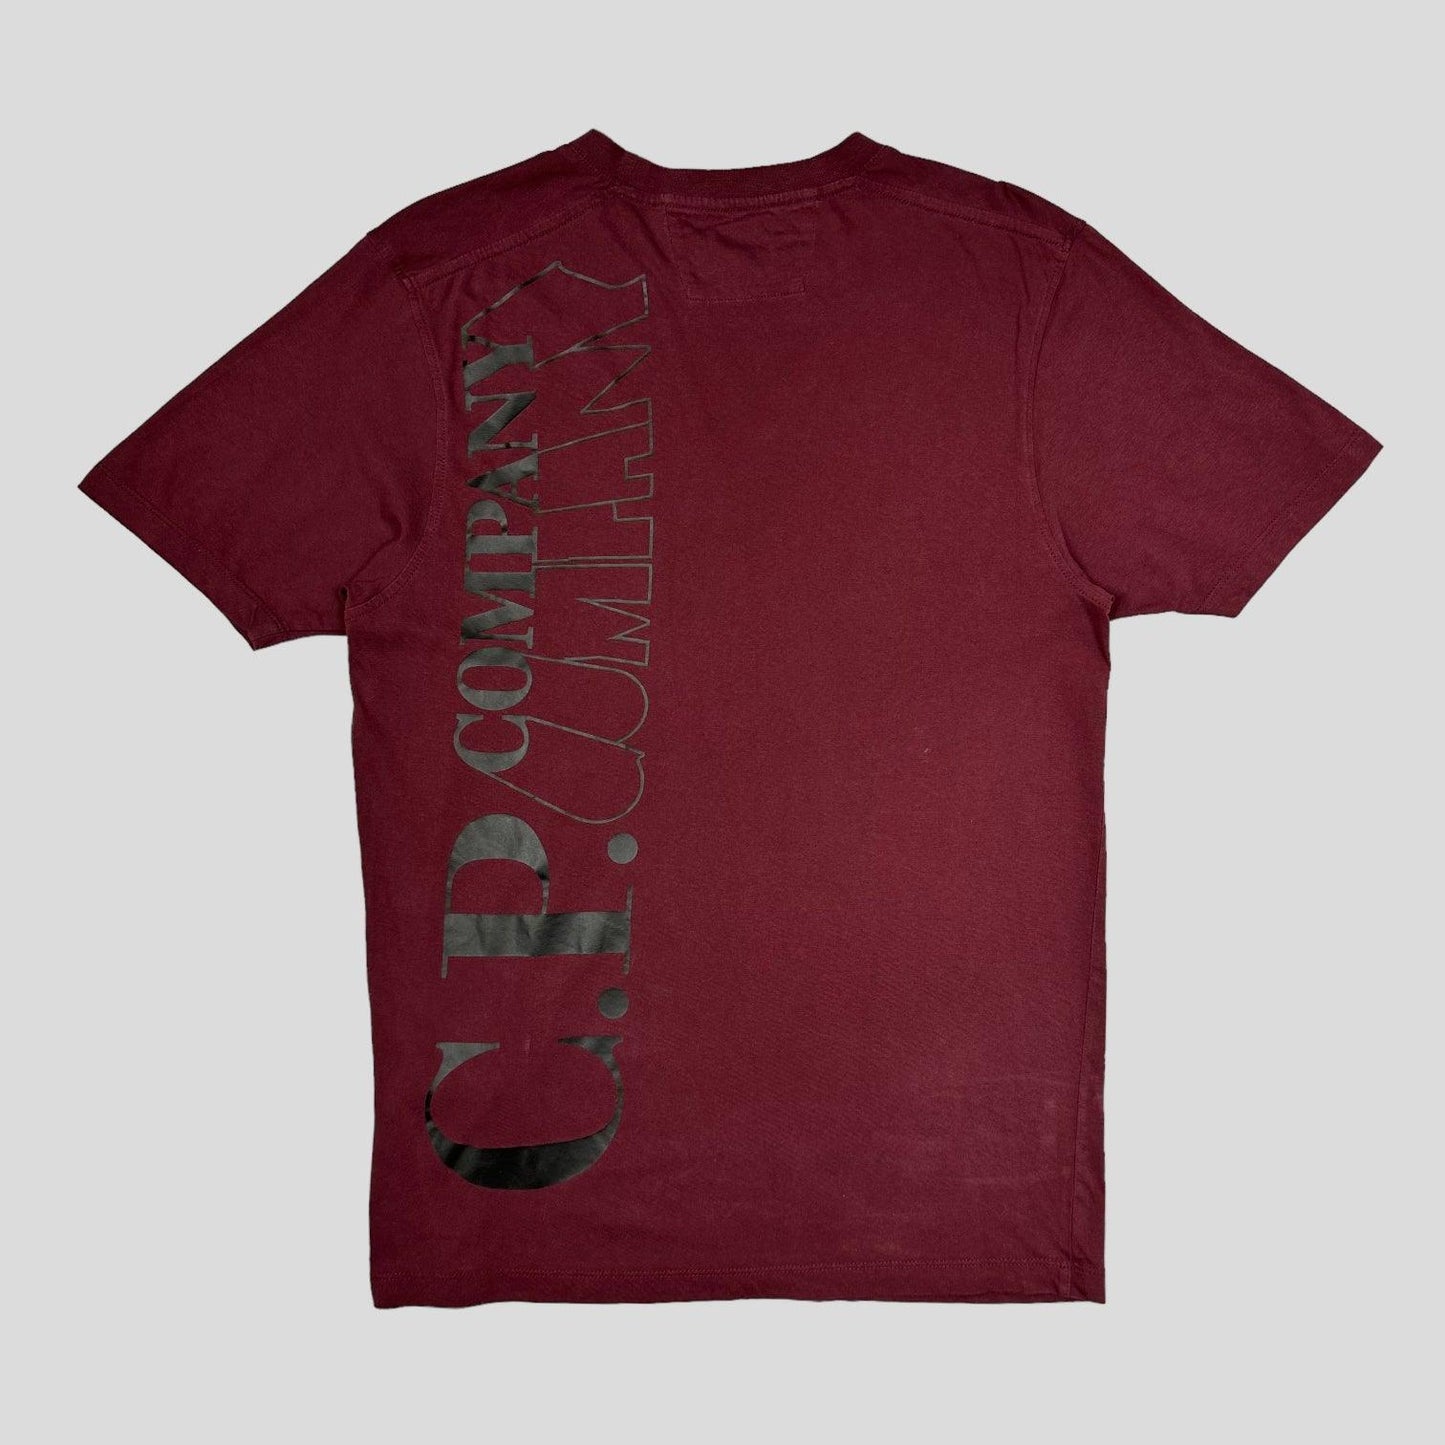 CP Company Spellout T-shirt - M - Known Source